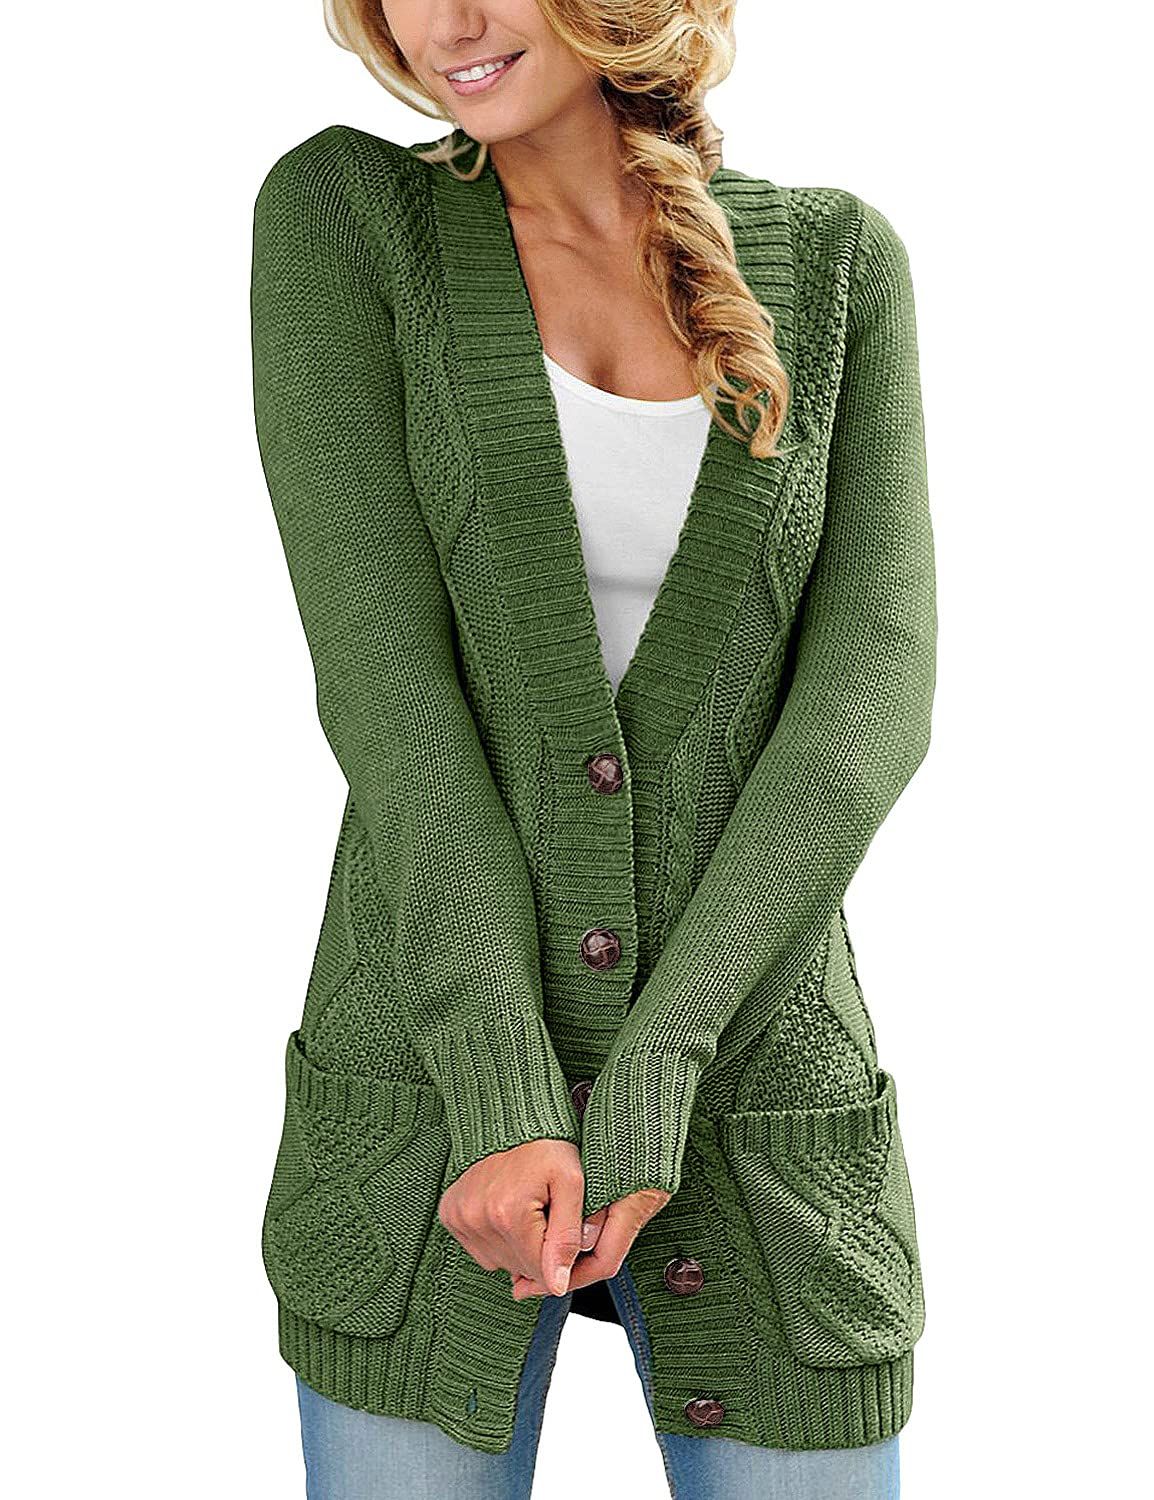 luvamia Womens Long Sleeve Open Front Buttons Cable Knit Pockets Sweater Cardigan | Amazon (US)